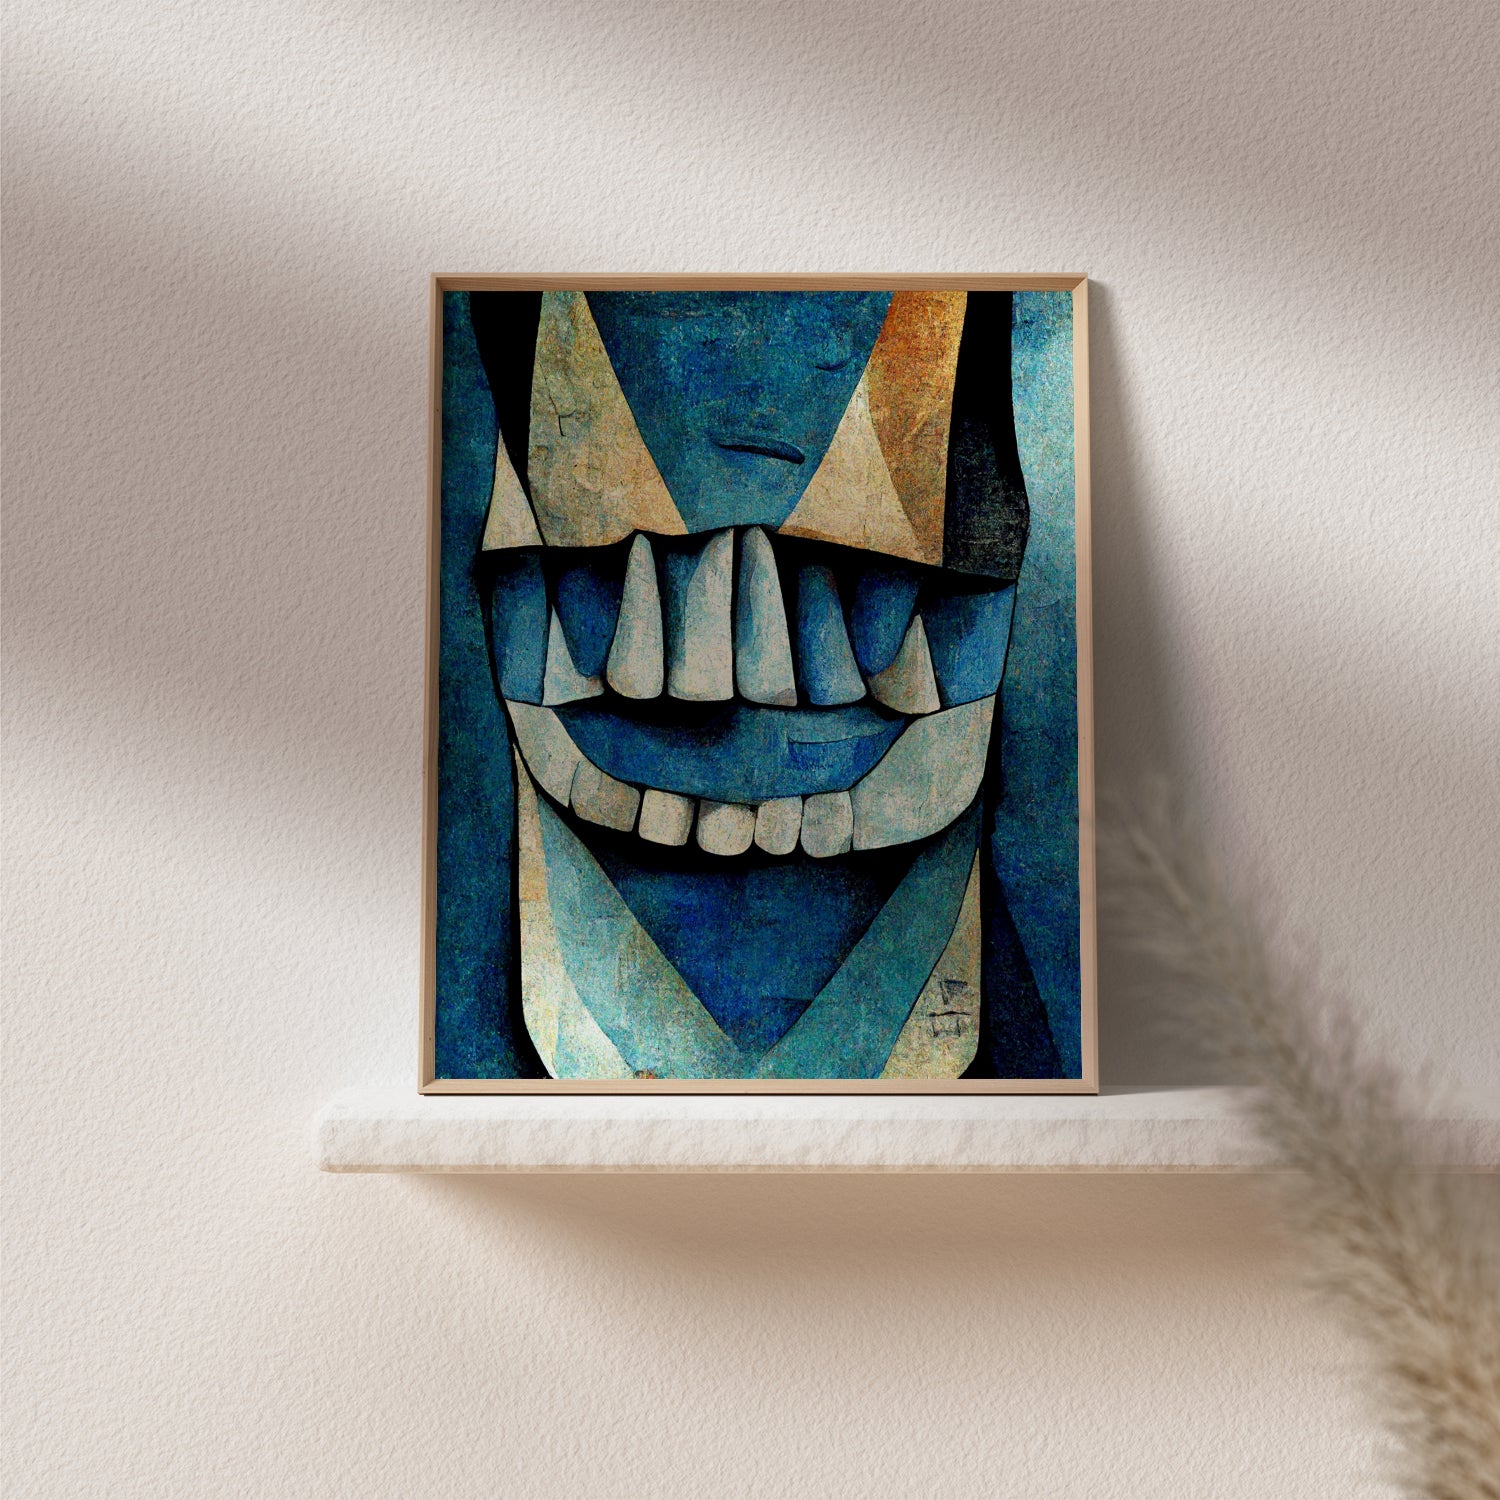 Dental decor with Cubism-inspired design." "Illustration of teeth in dynamic and colorful form.